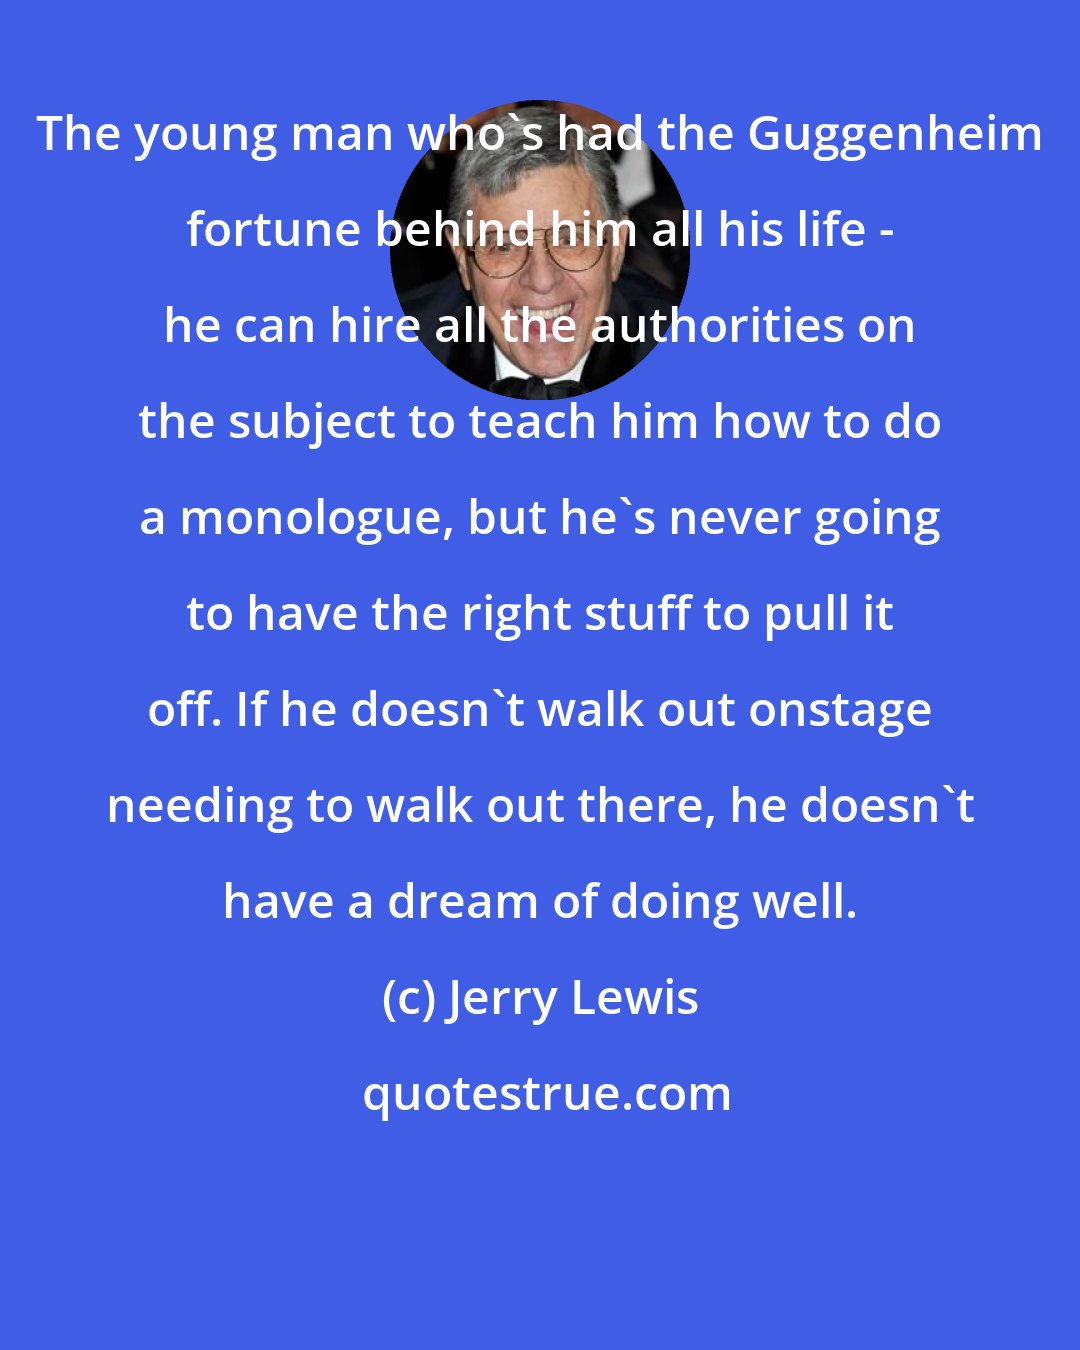 Jerry Lewis: The young man who's had the Guggenheim fortune behind him all his life - he can hire all the authorities on the subject to teach him how to do a monologue, but he's never going to have the right stuff to pull it off. If he doesn't walk out onstage needing to walk out there, he doesn't have a dream of doing well.